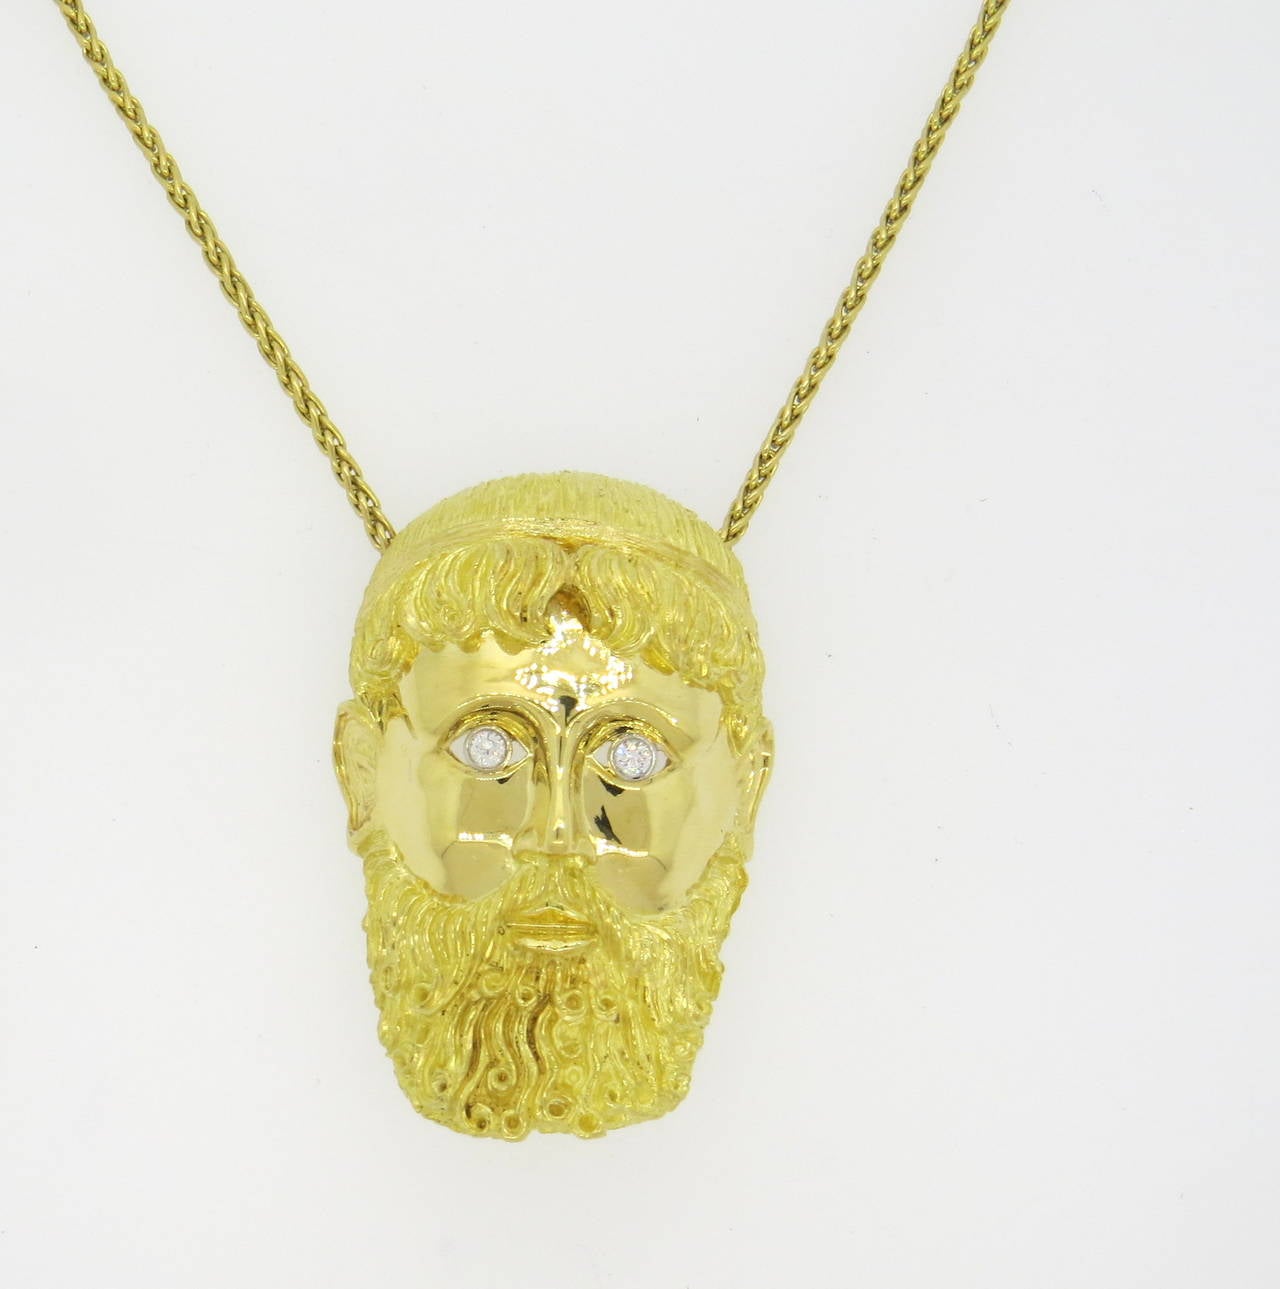 Impressive and large 18k gold brooch pendant,crafted by Henry Dunay , featuring a man's face with beard, crafted with two diamond eyes - approx. 0.30ctw G/VS. Pendant/brooch measures 67mm x 43mm. Marked 18k and Dunay. Weight - 69.7g. Chain is not